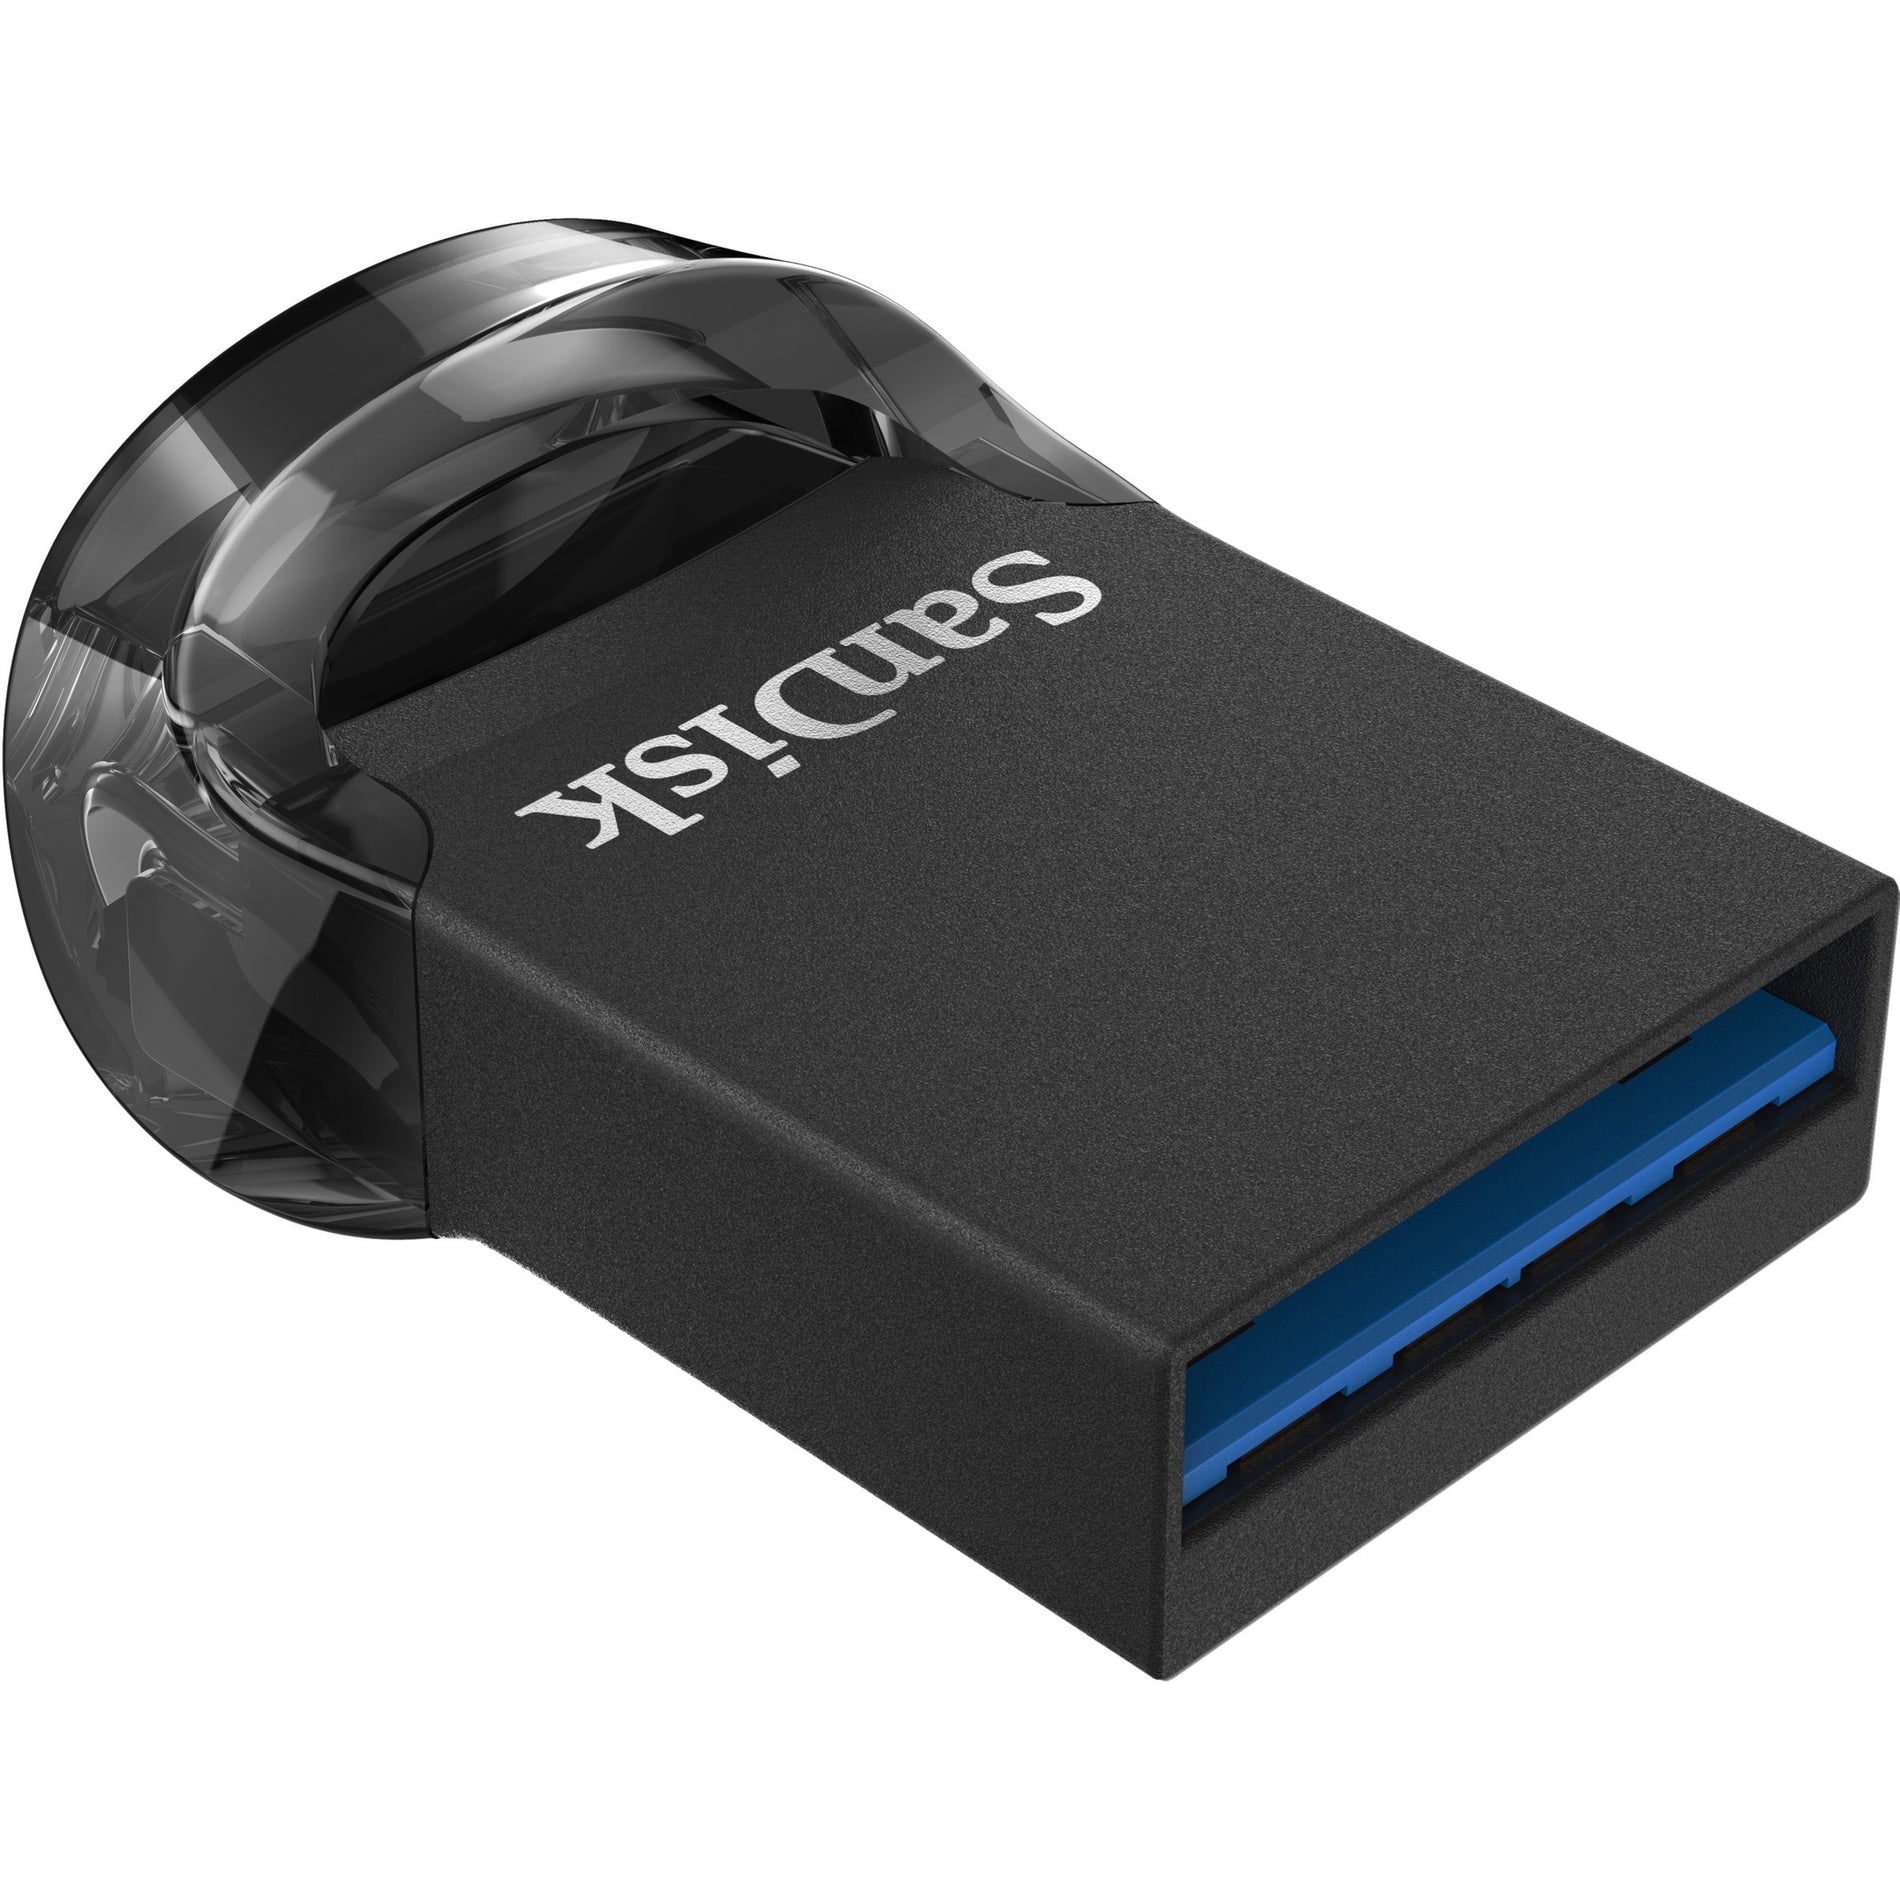 SanDisk SDCZ430-256G-A46 Ultra Fit USB 3.1 Flash Drive 256GB, High-Speed Data Storage Solution